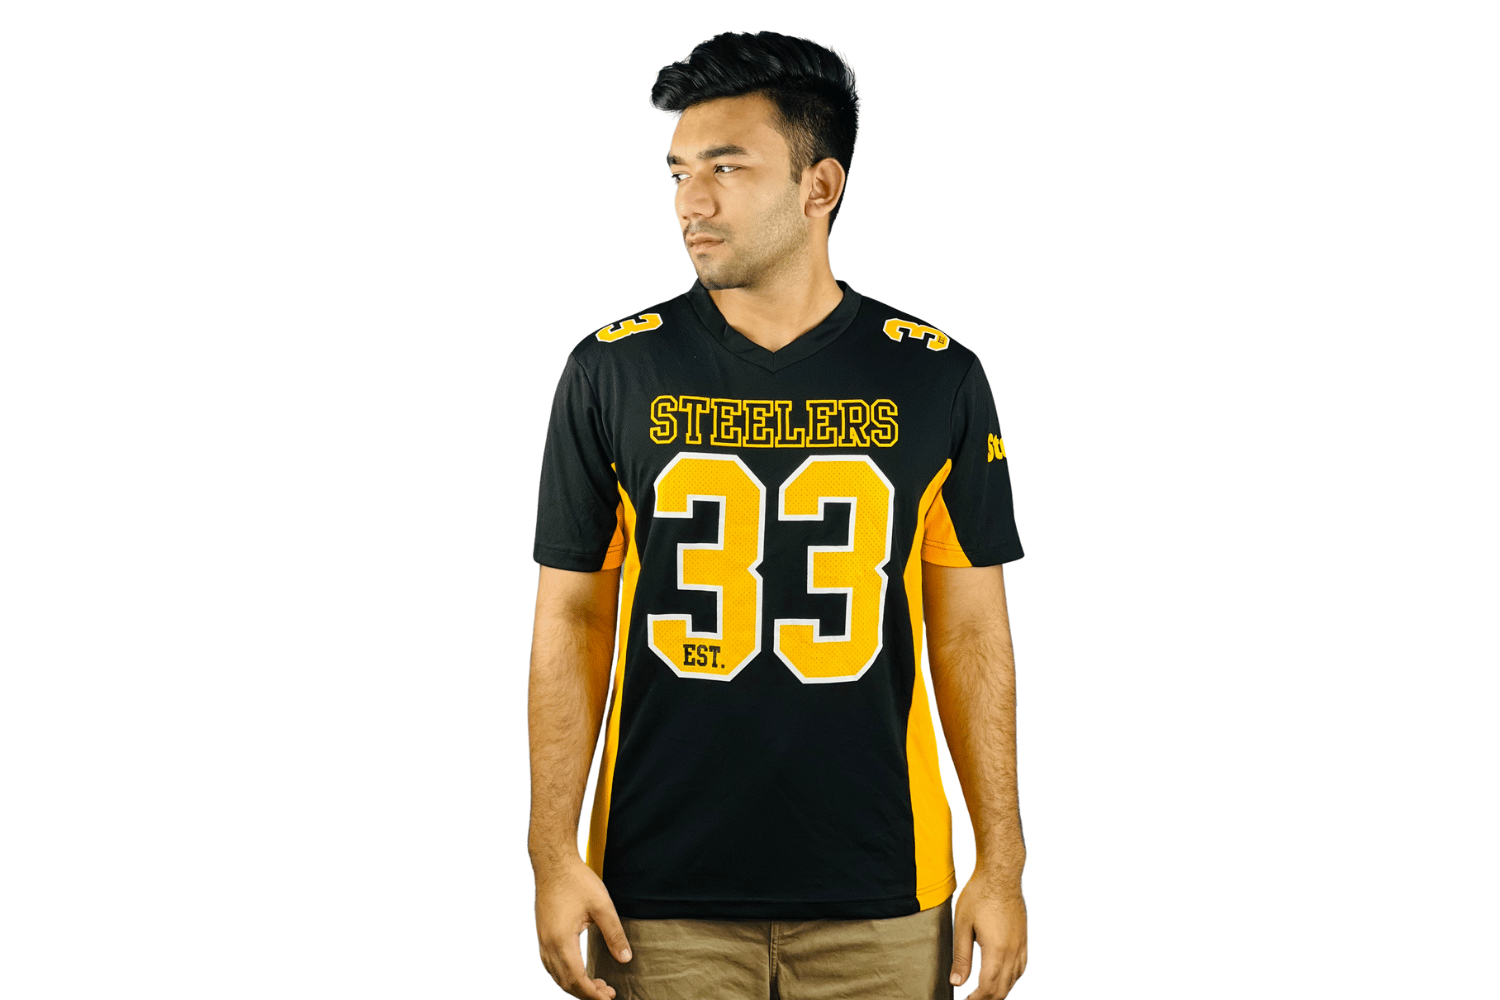 NFL Domination Series: Iconic Number 33 Fitness Challenge Jersey on Stunner Mart